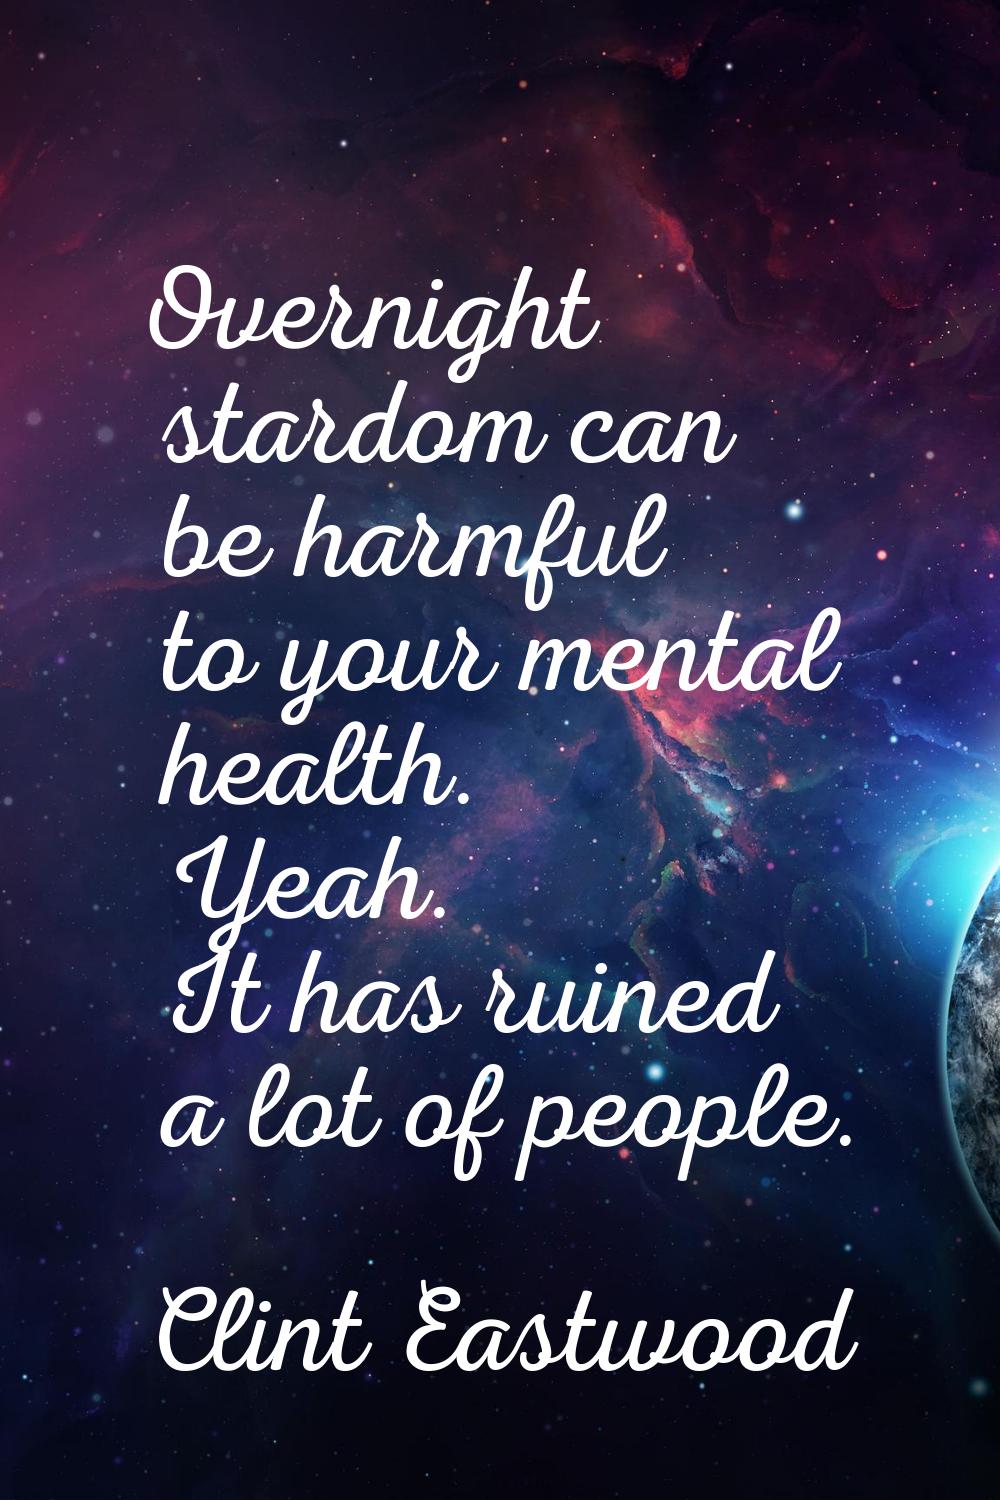 Overnight stardom can be harmful to your mental health. Yeah. It has ruined a lot of people.